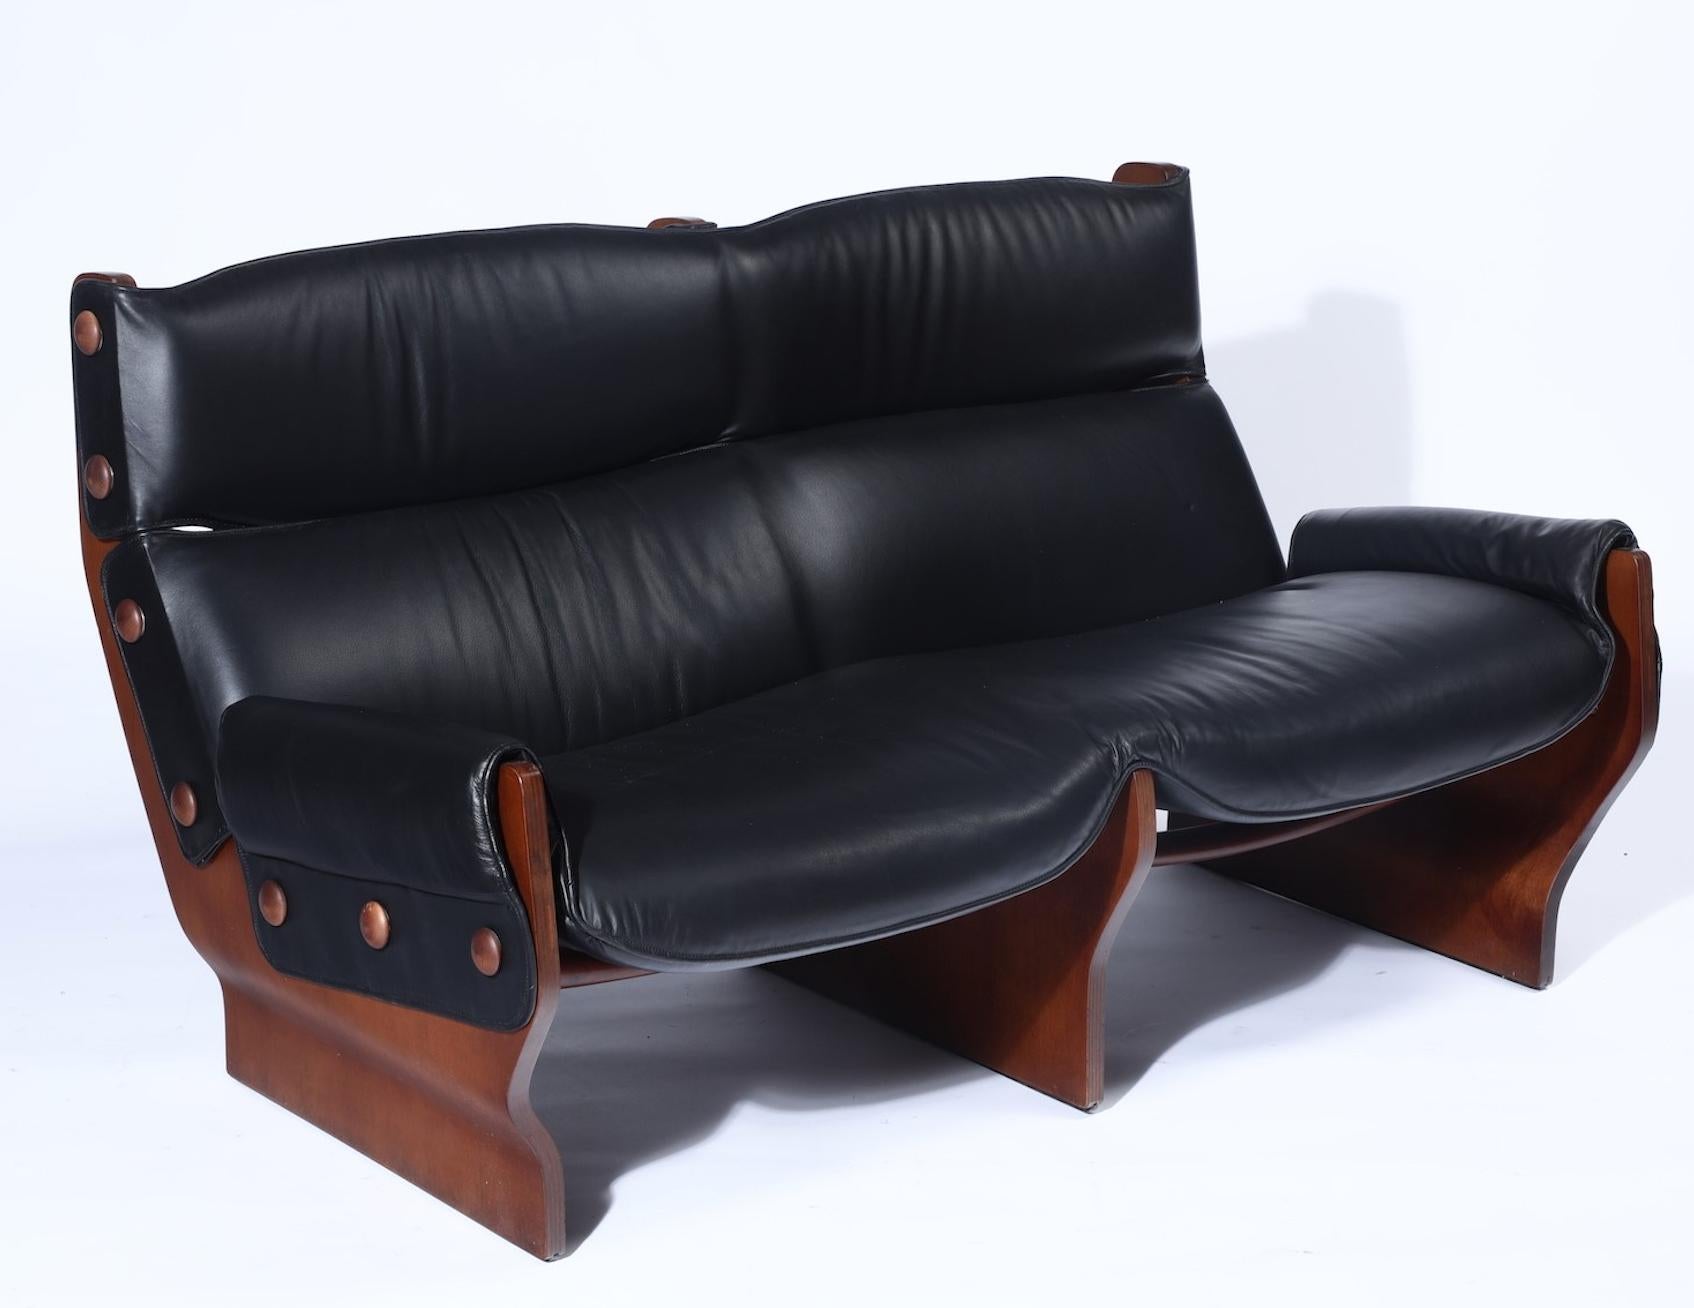 Osvaldo Borsani, a mod. Canada Sofa, Italy, 1960s. Wooden structure and black leather upholstery meticulously cared for and imported from Italy.